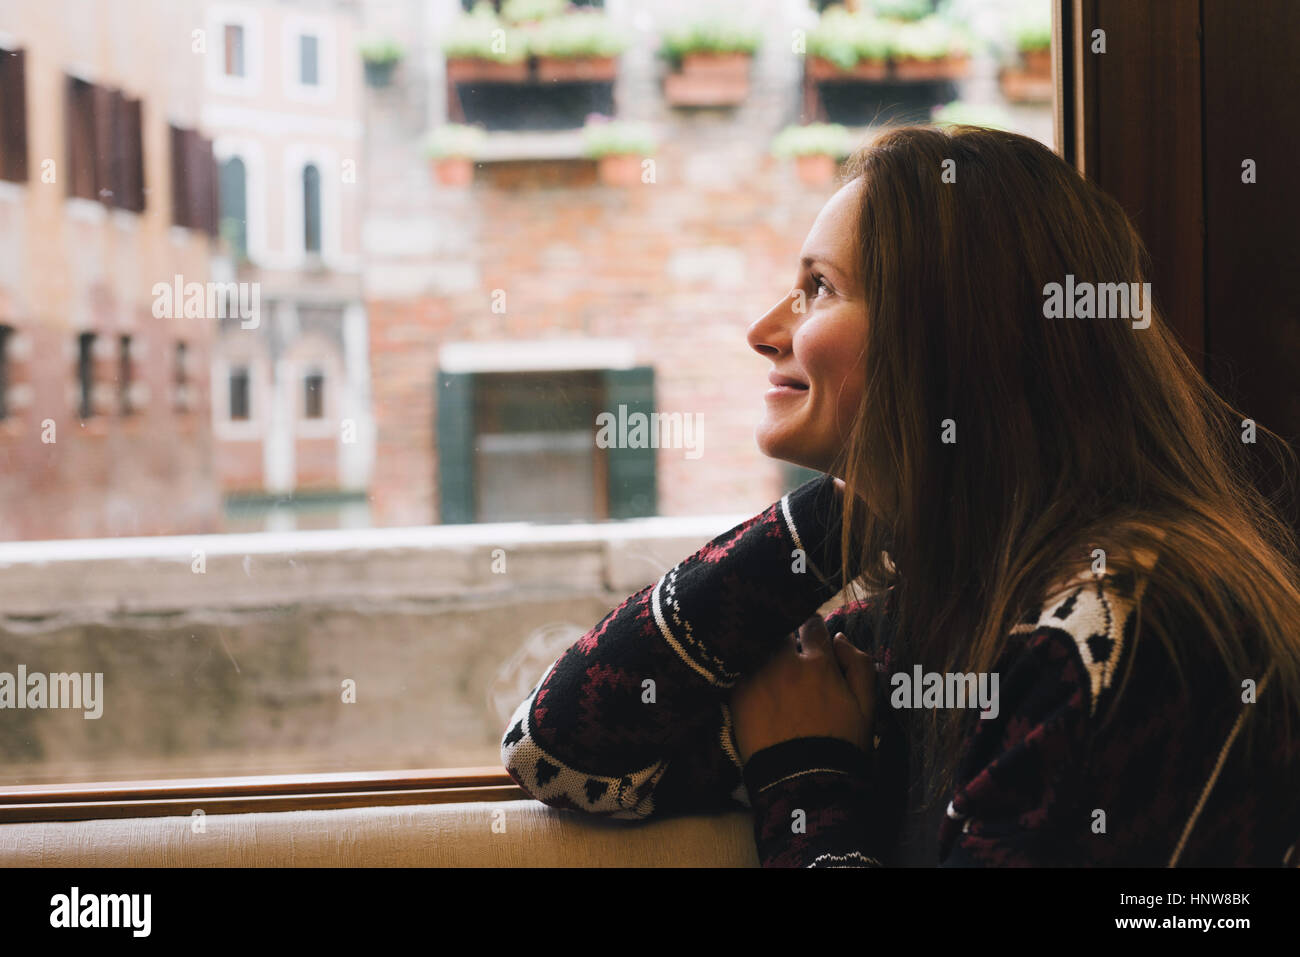 Woman looking out window, Venice, Italy Stock Photo